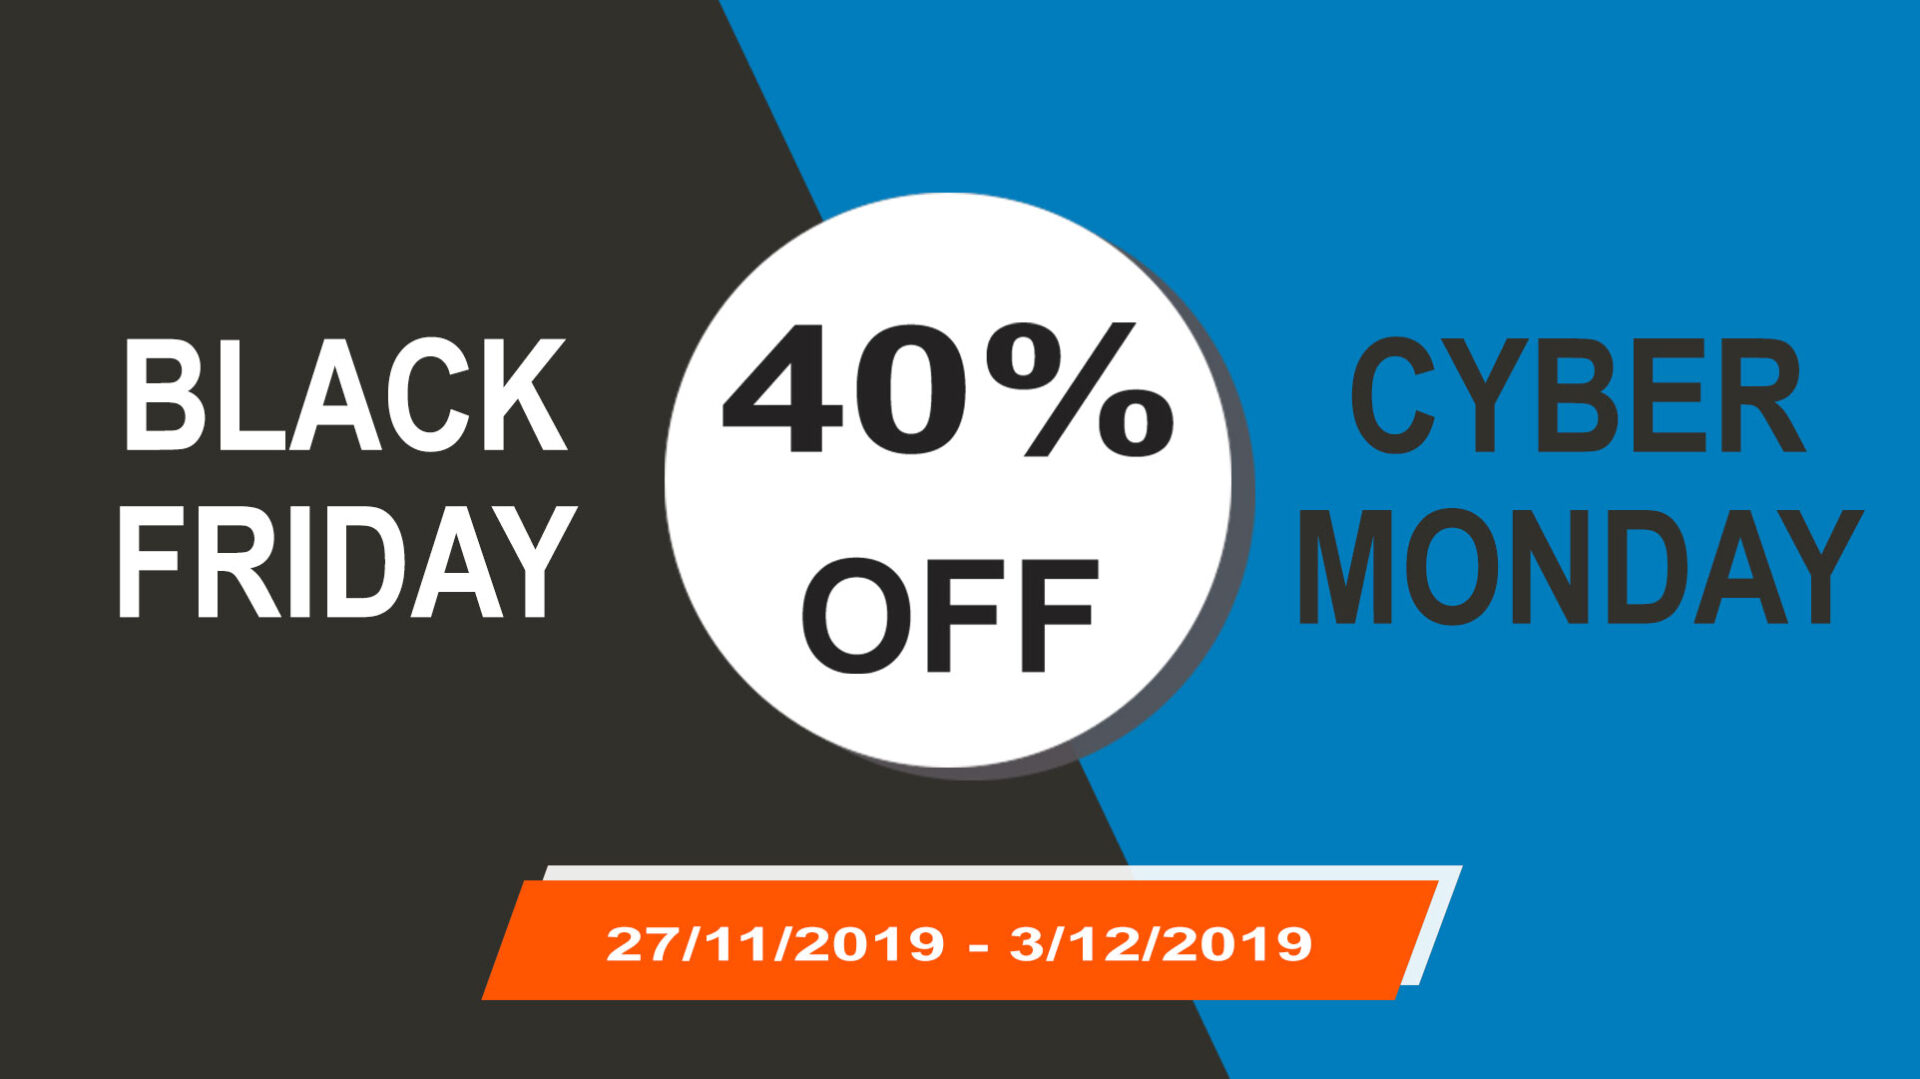 Biggest Deal | 40% OFF for Black Friday & Cyber Monday! - Why Is Black Friday A Big Deal